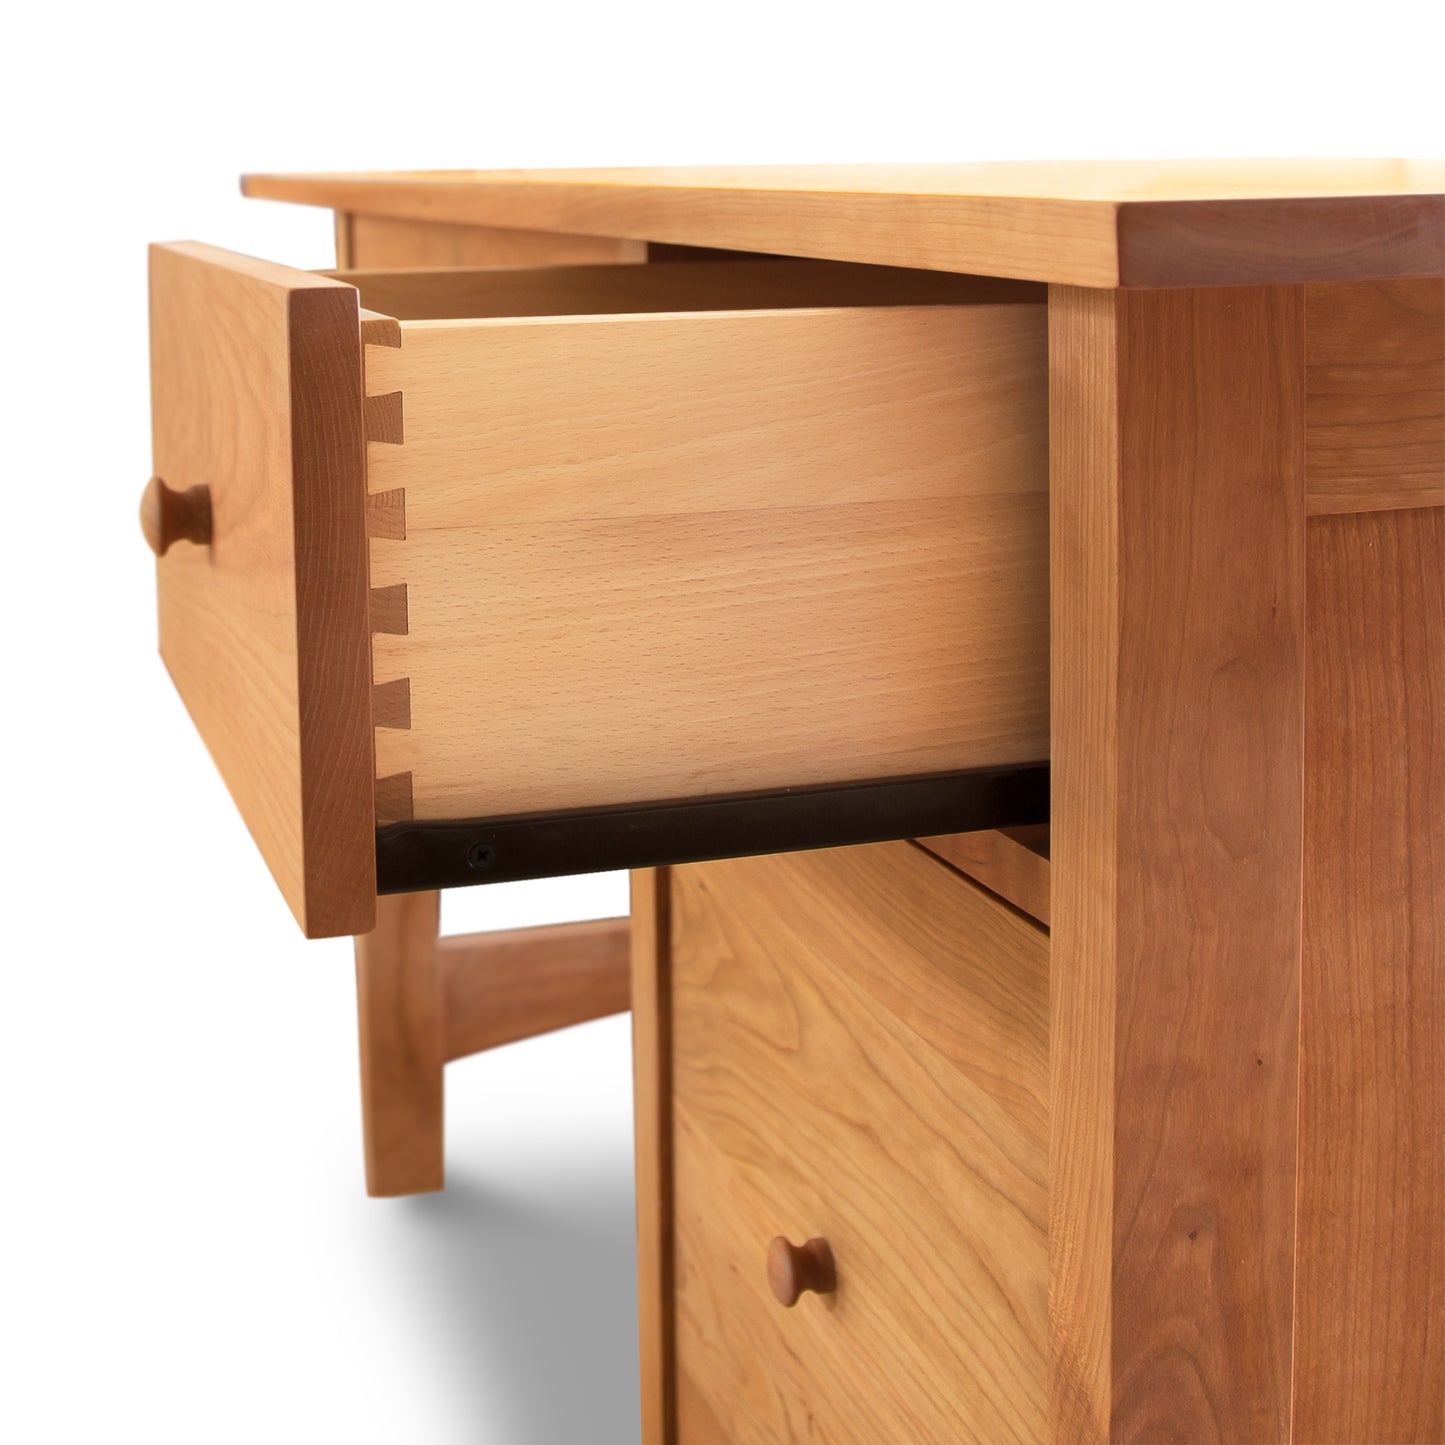 A Vermont Furniture Designs Burlington Shaker Study Desk with an open drawer featuring dovetail joints, isolated on a white background.